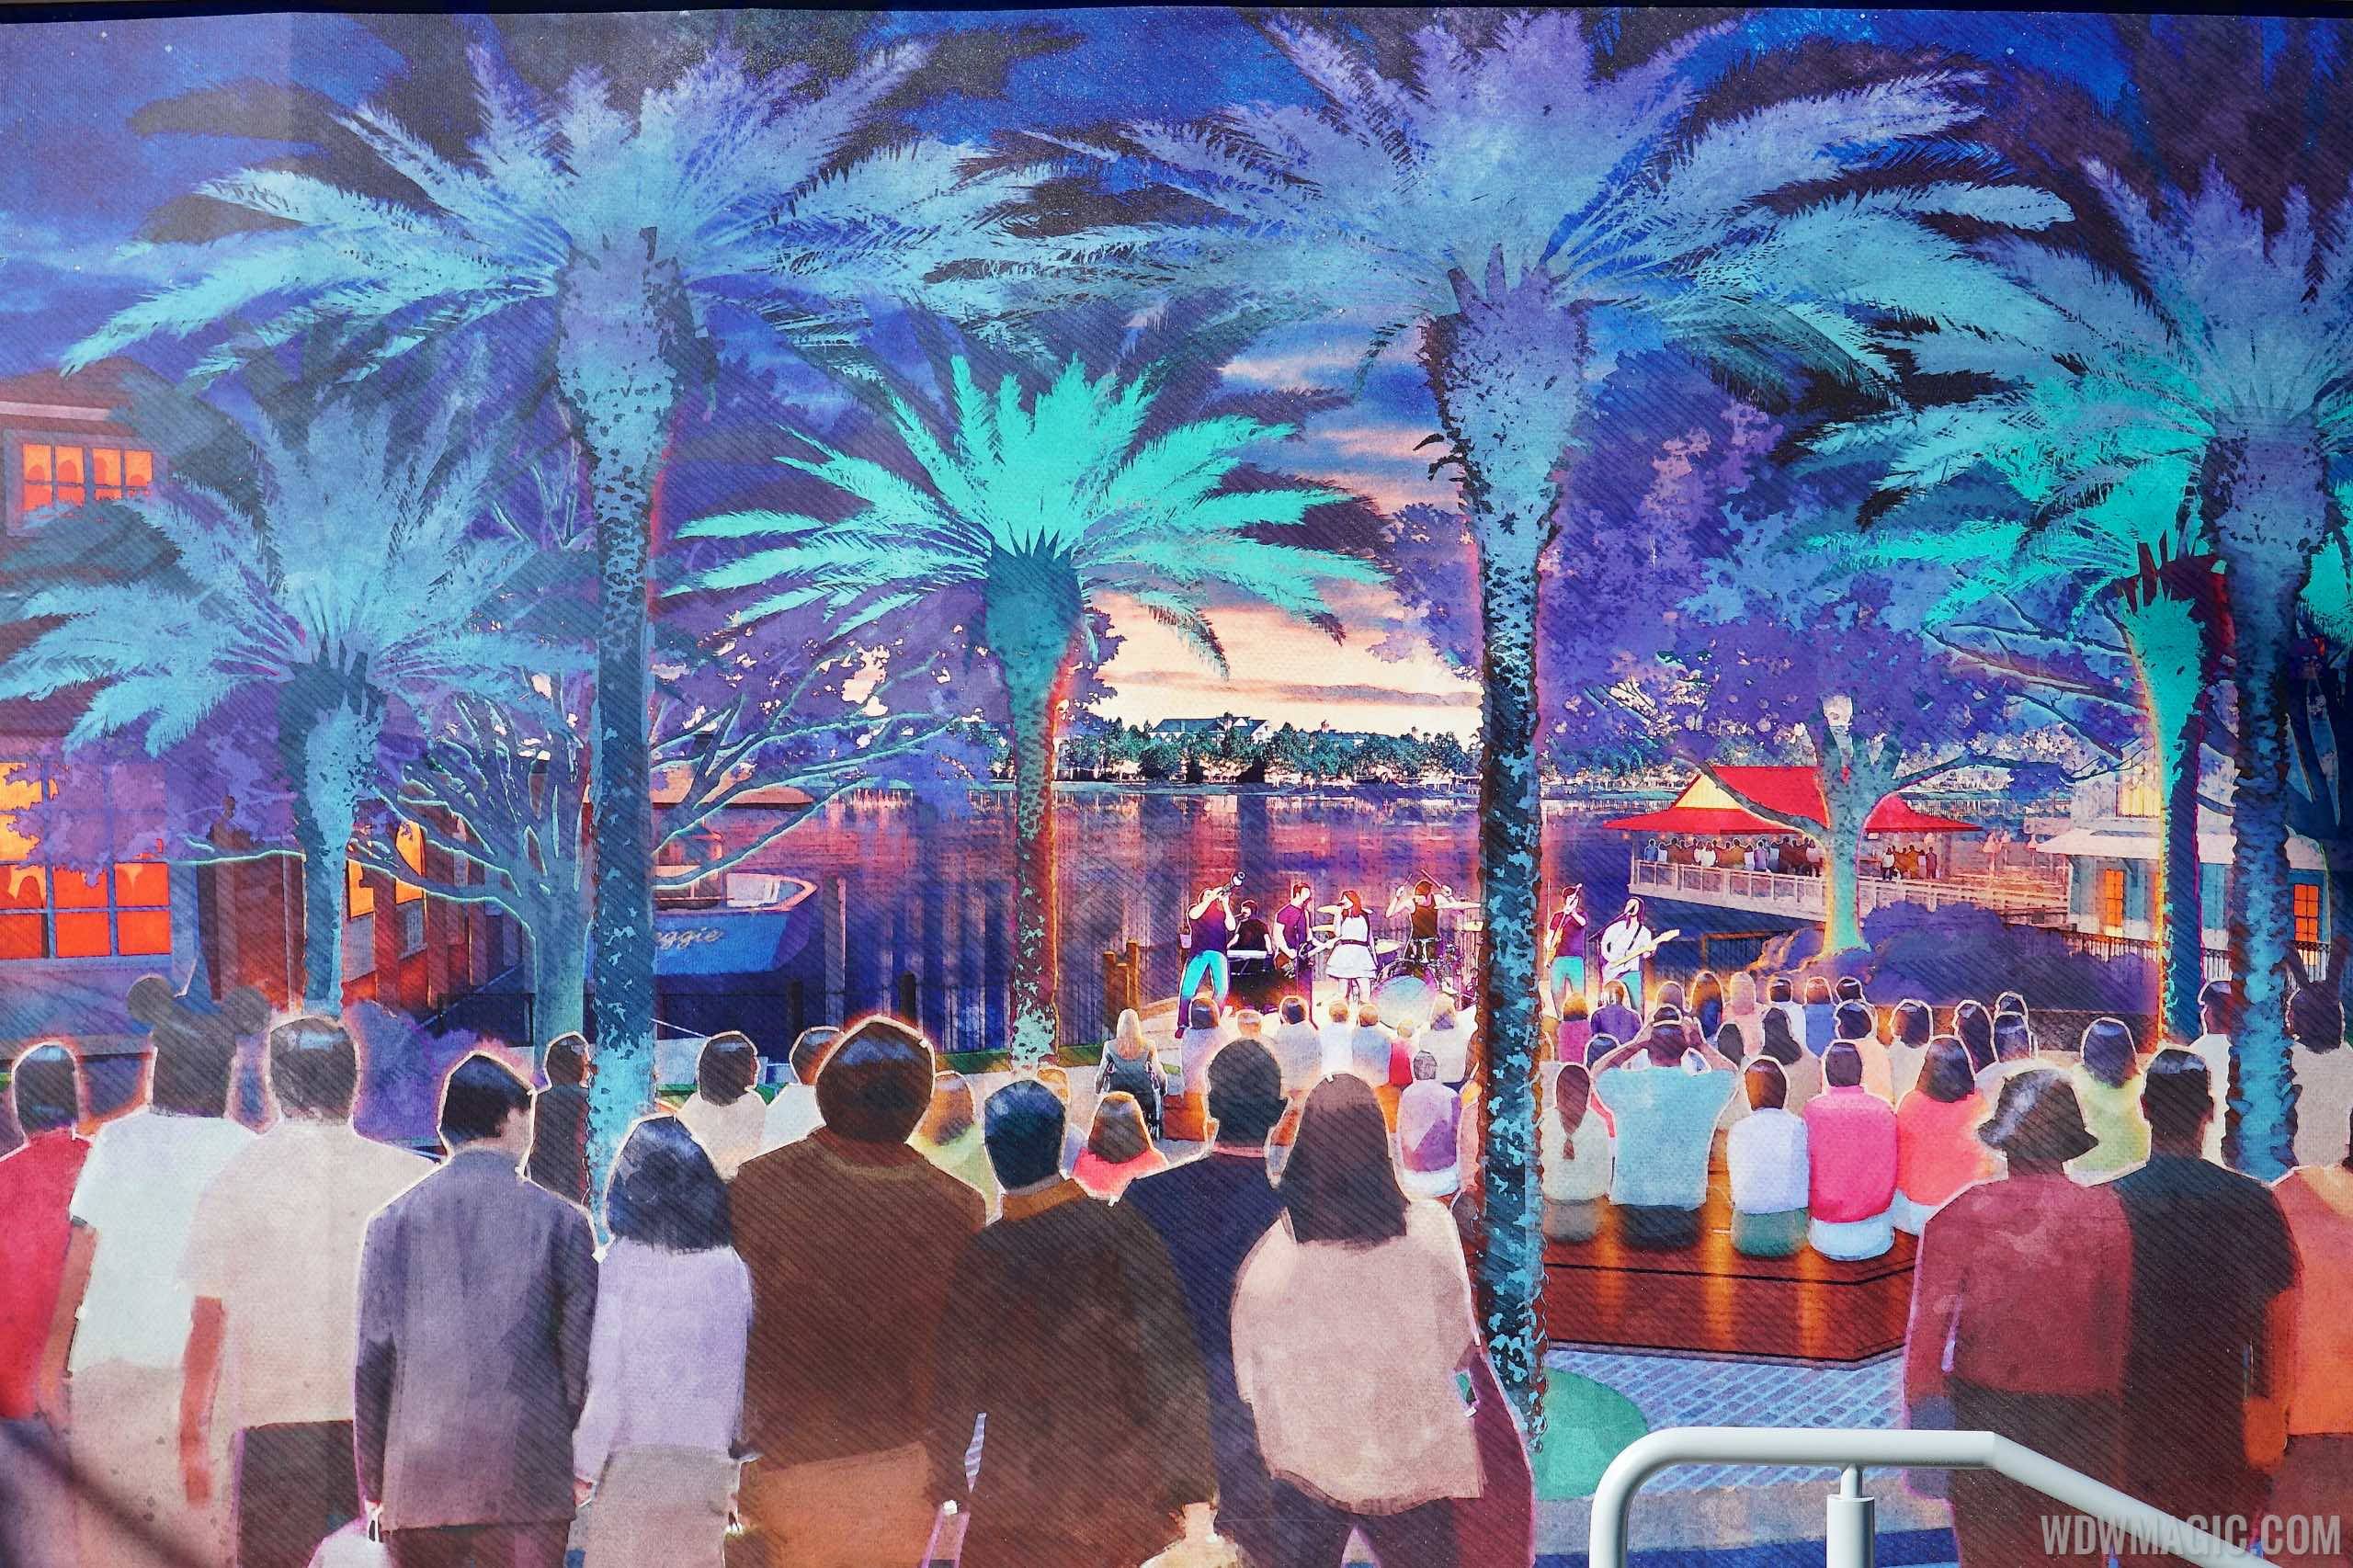 PHOTOS - New concept art shows more of The Landing at Disney Springs